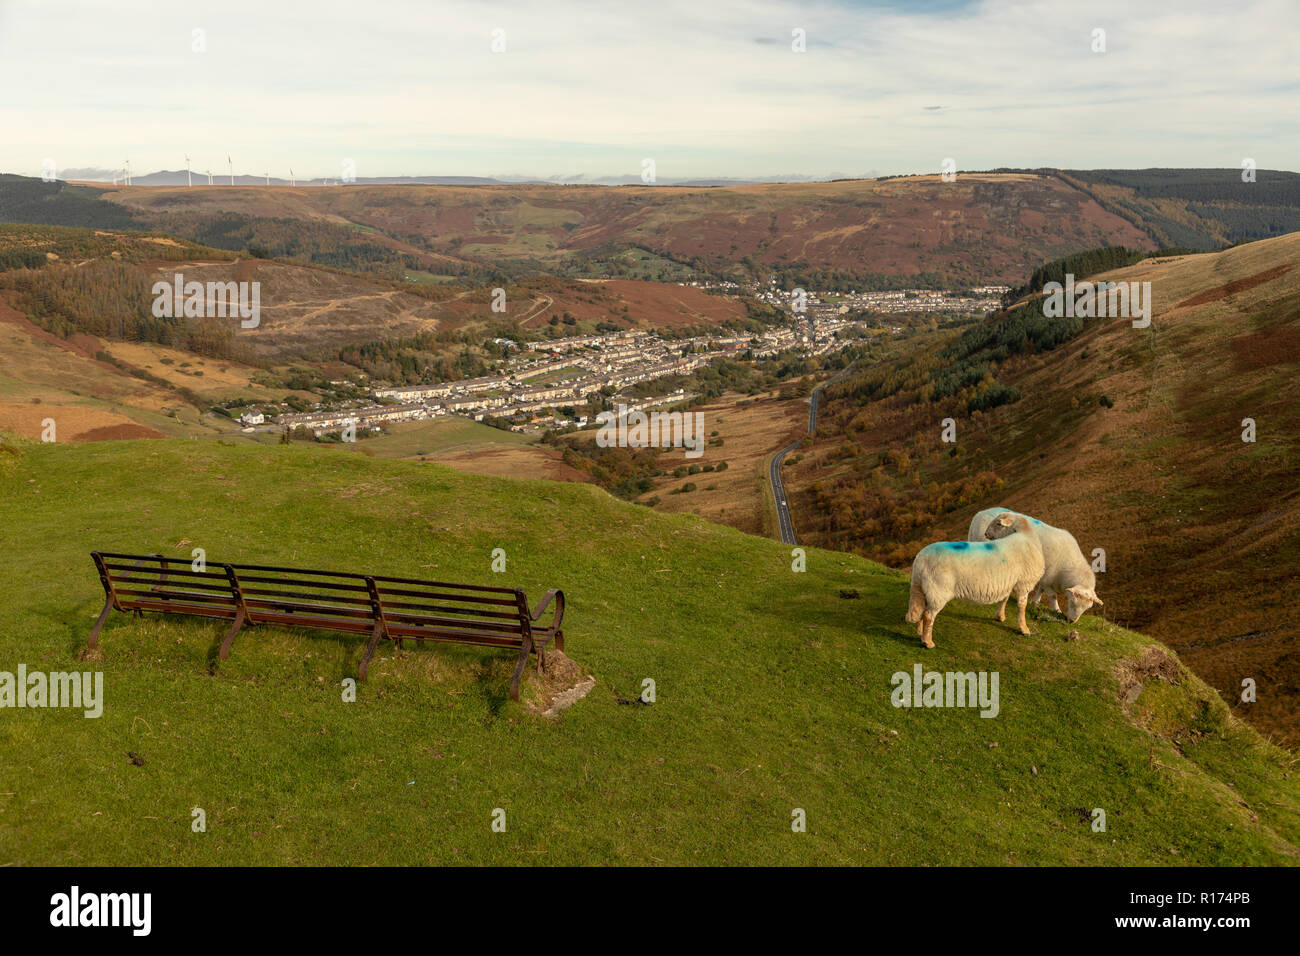 Sheep gather at the Bwlch y Clawdd mountain pass near Treorchy in the Rhondda Valleys, South Wales, UK. Stock Photo